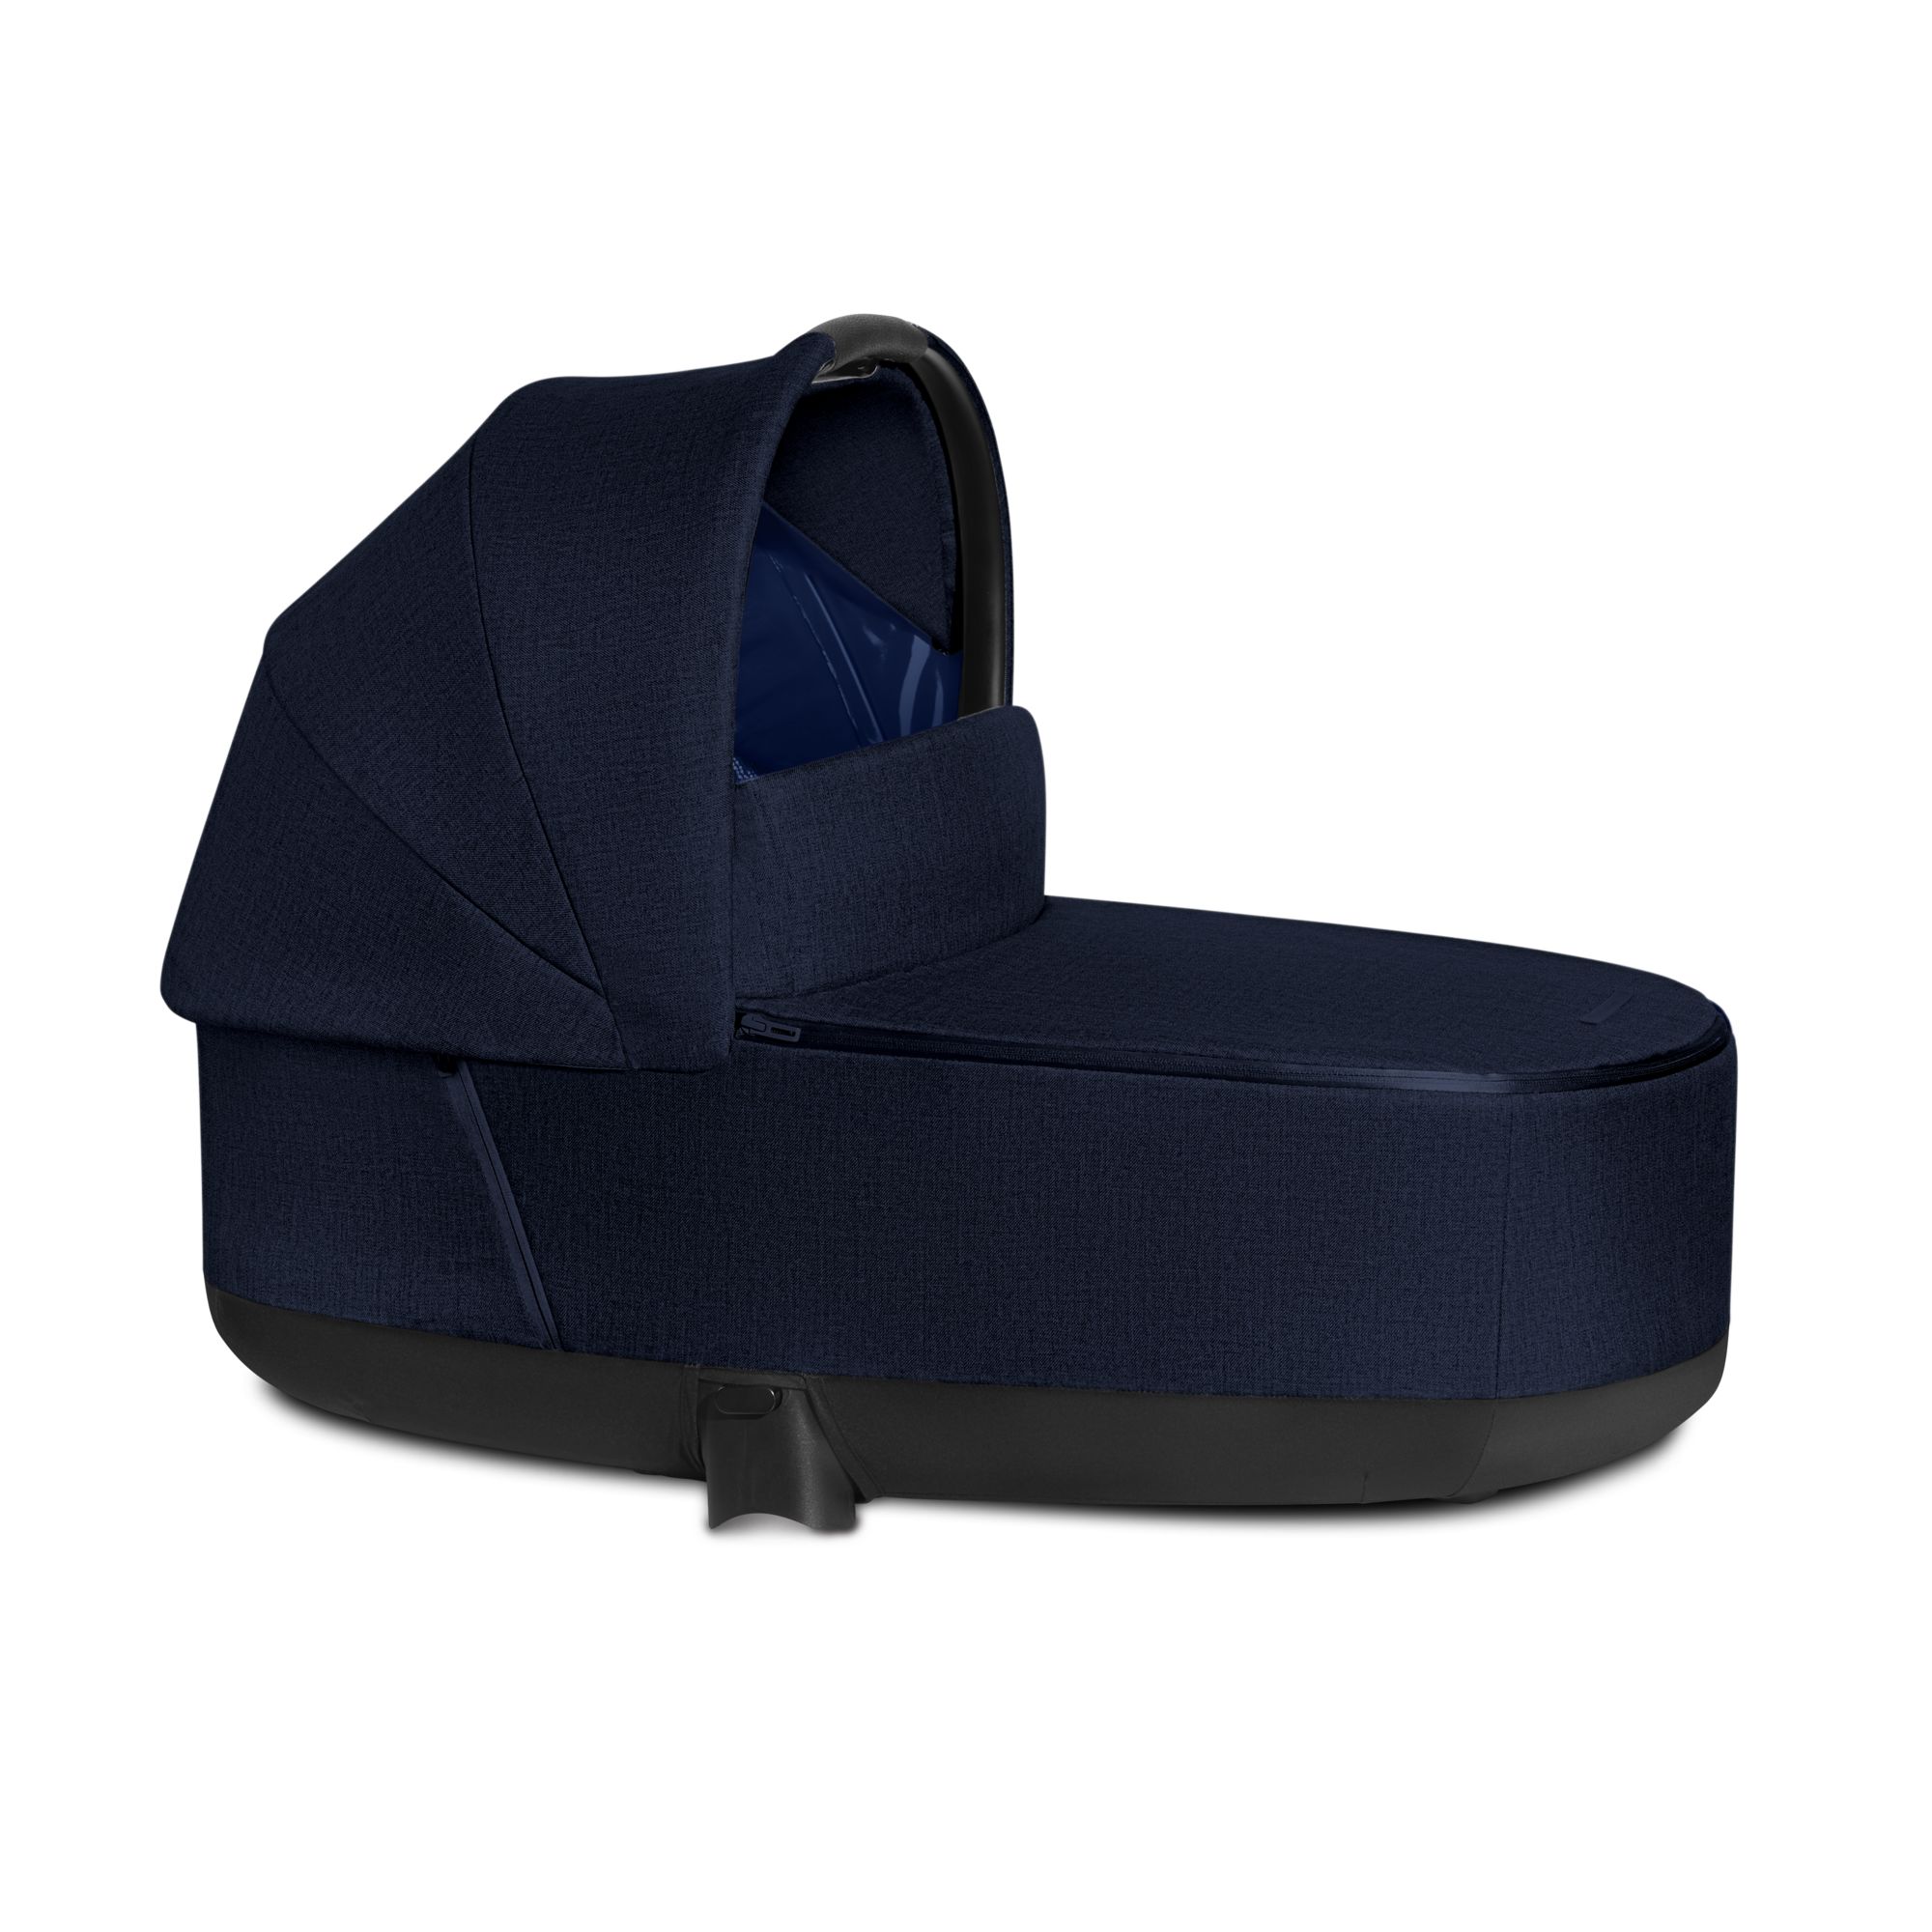 Cybex Priam Carry Cot Lux Plus